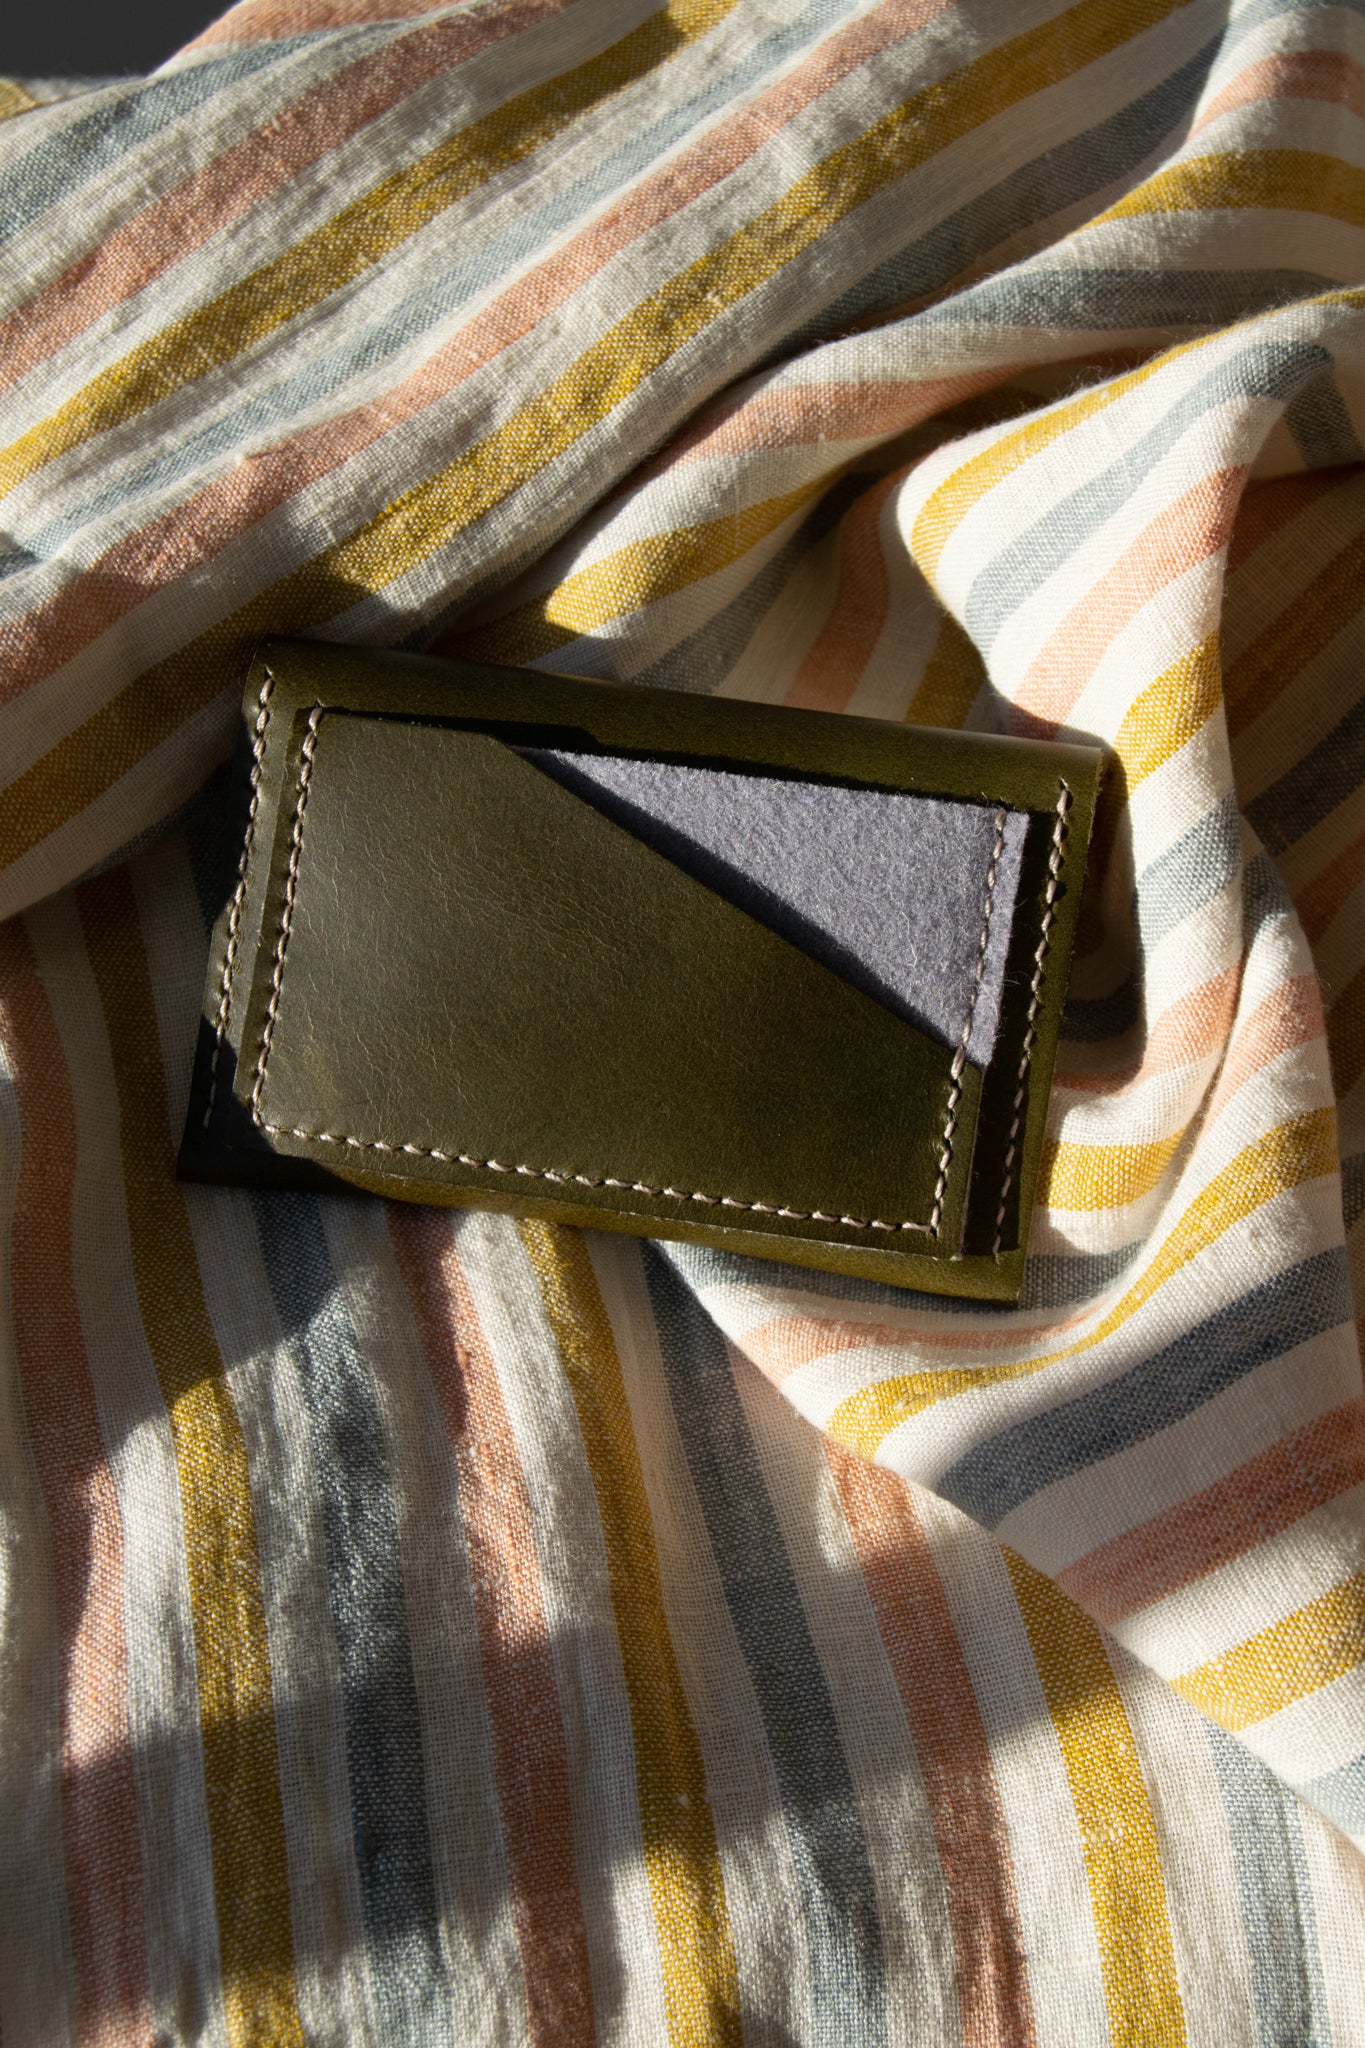 Geometric Leather Card Holder in Olive Green